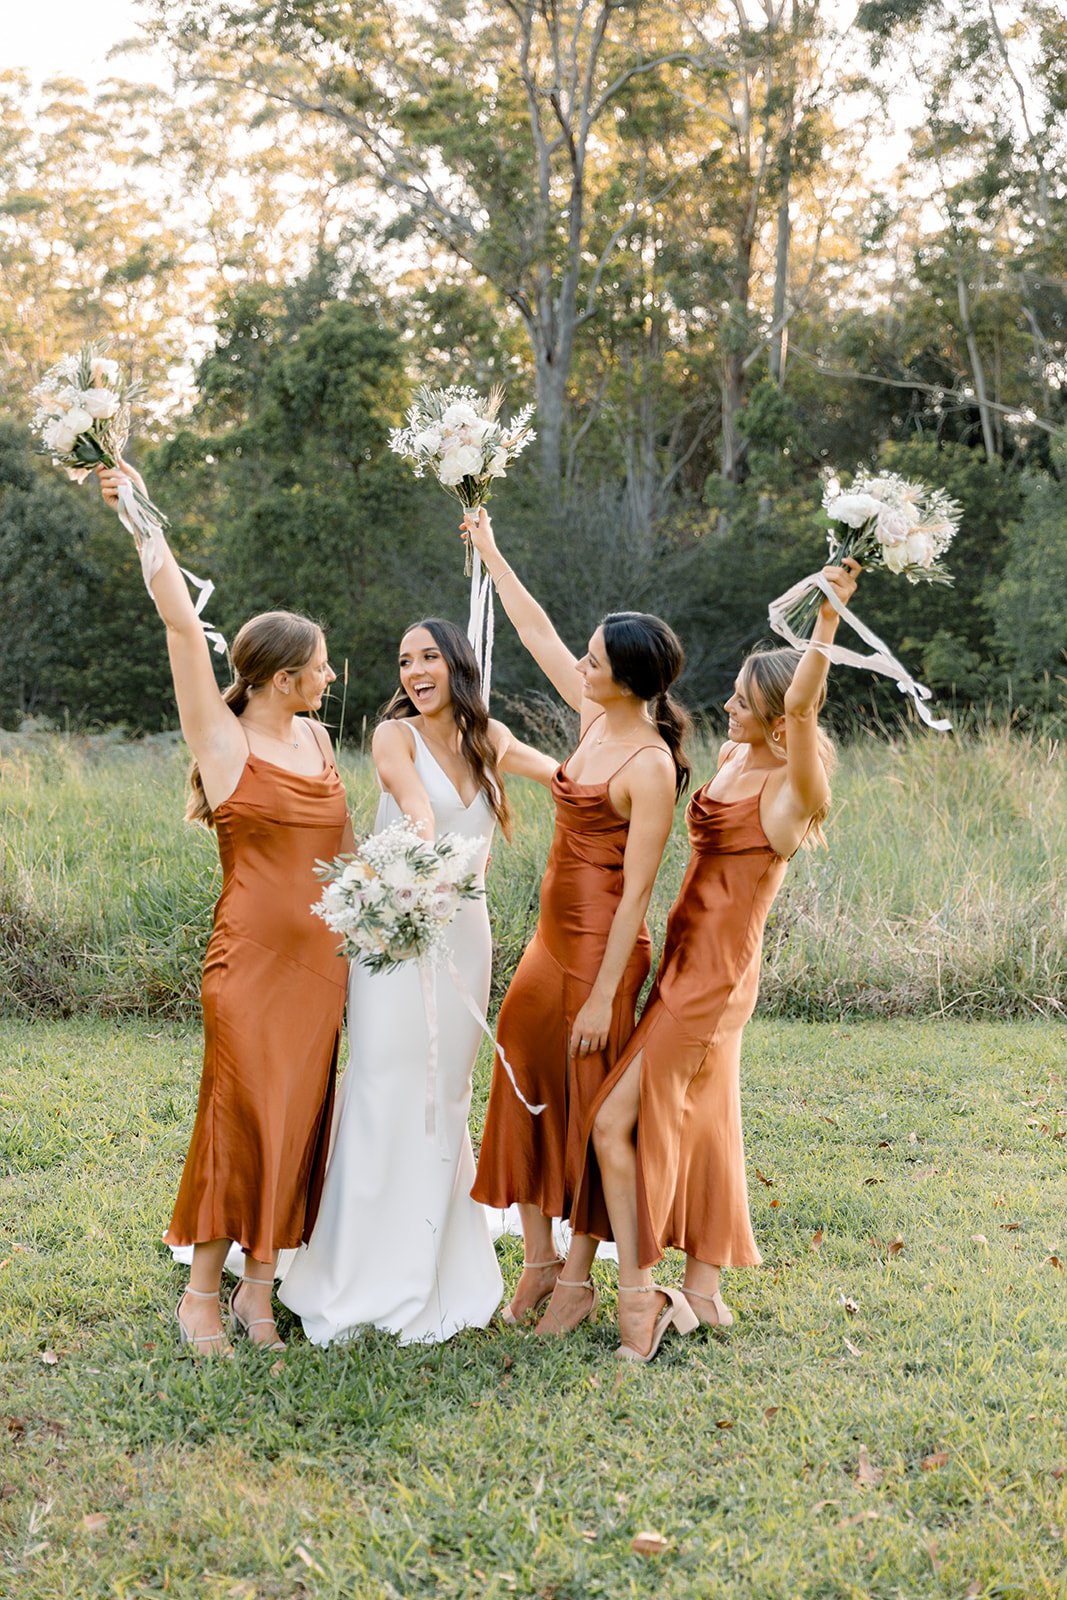 Bride and bridesmaids throwing bouquets in the air having fun